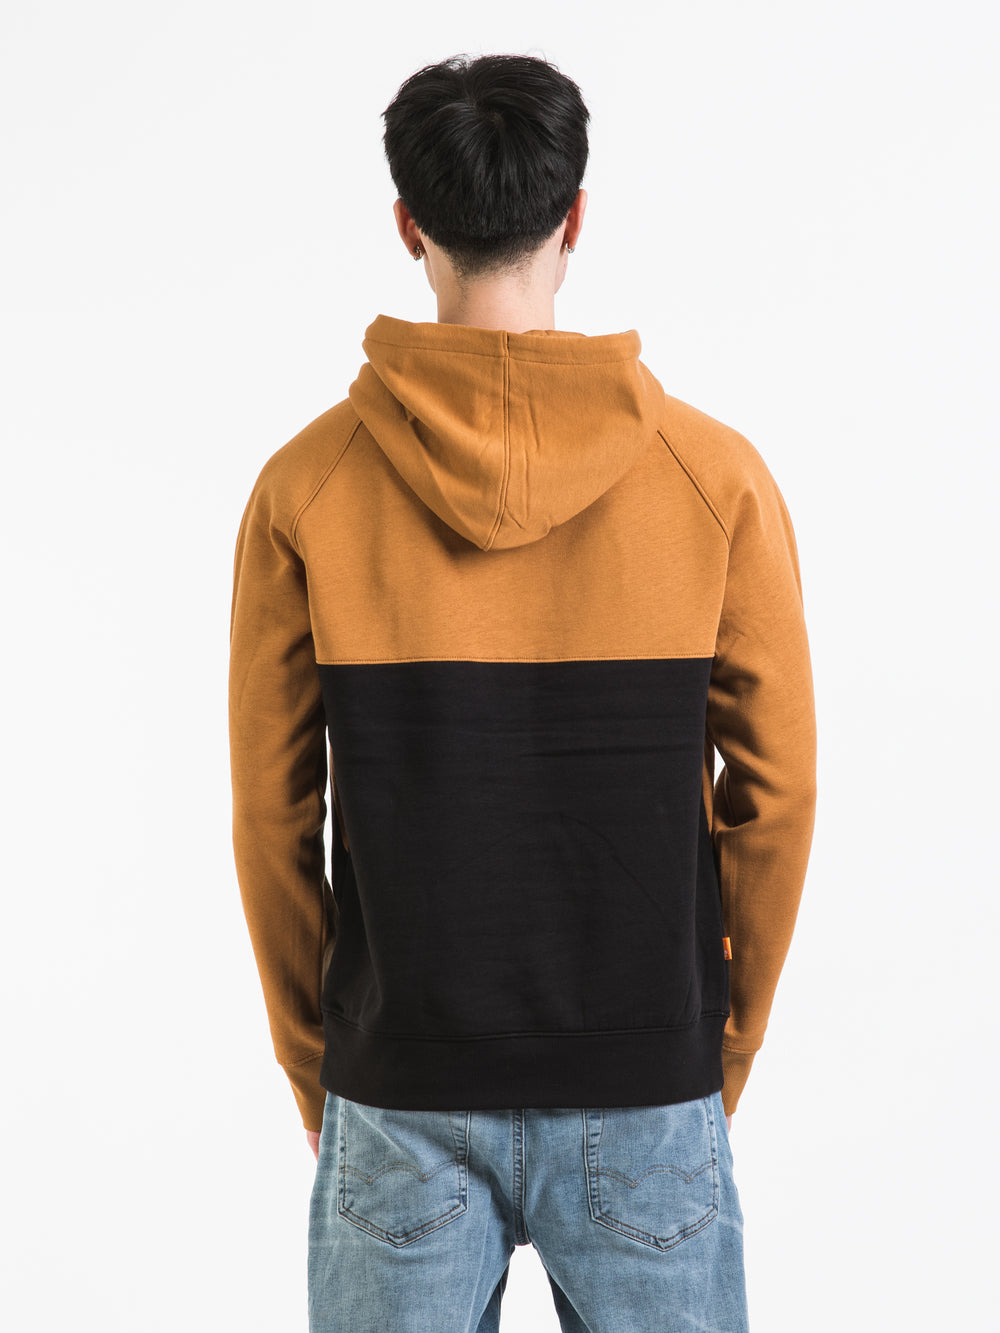 TIMBERLAND CUT & SEW PULLOVER HOODIE - CLEARANCE